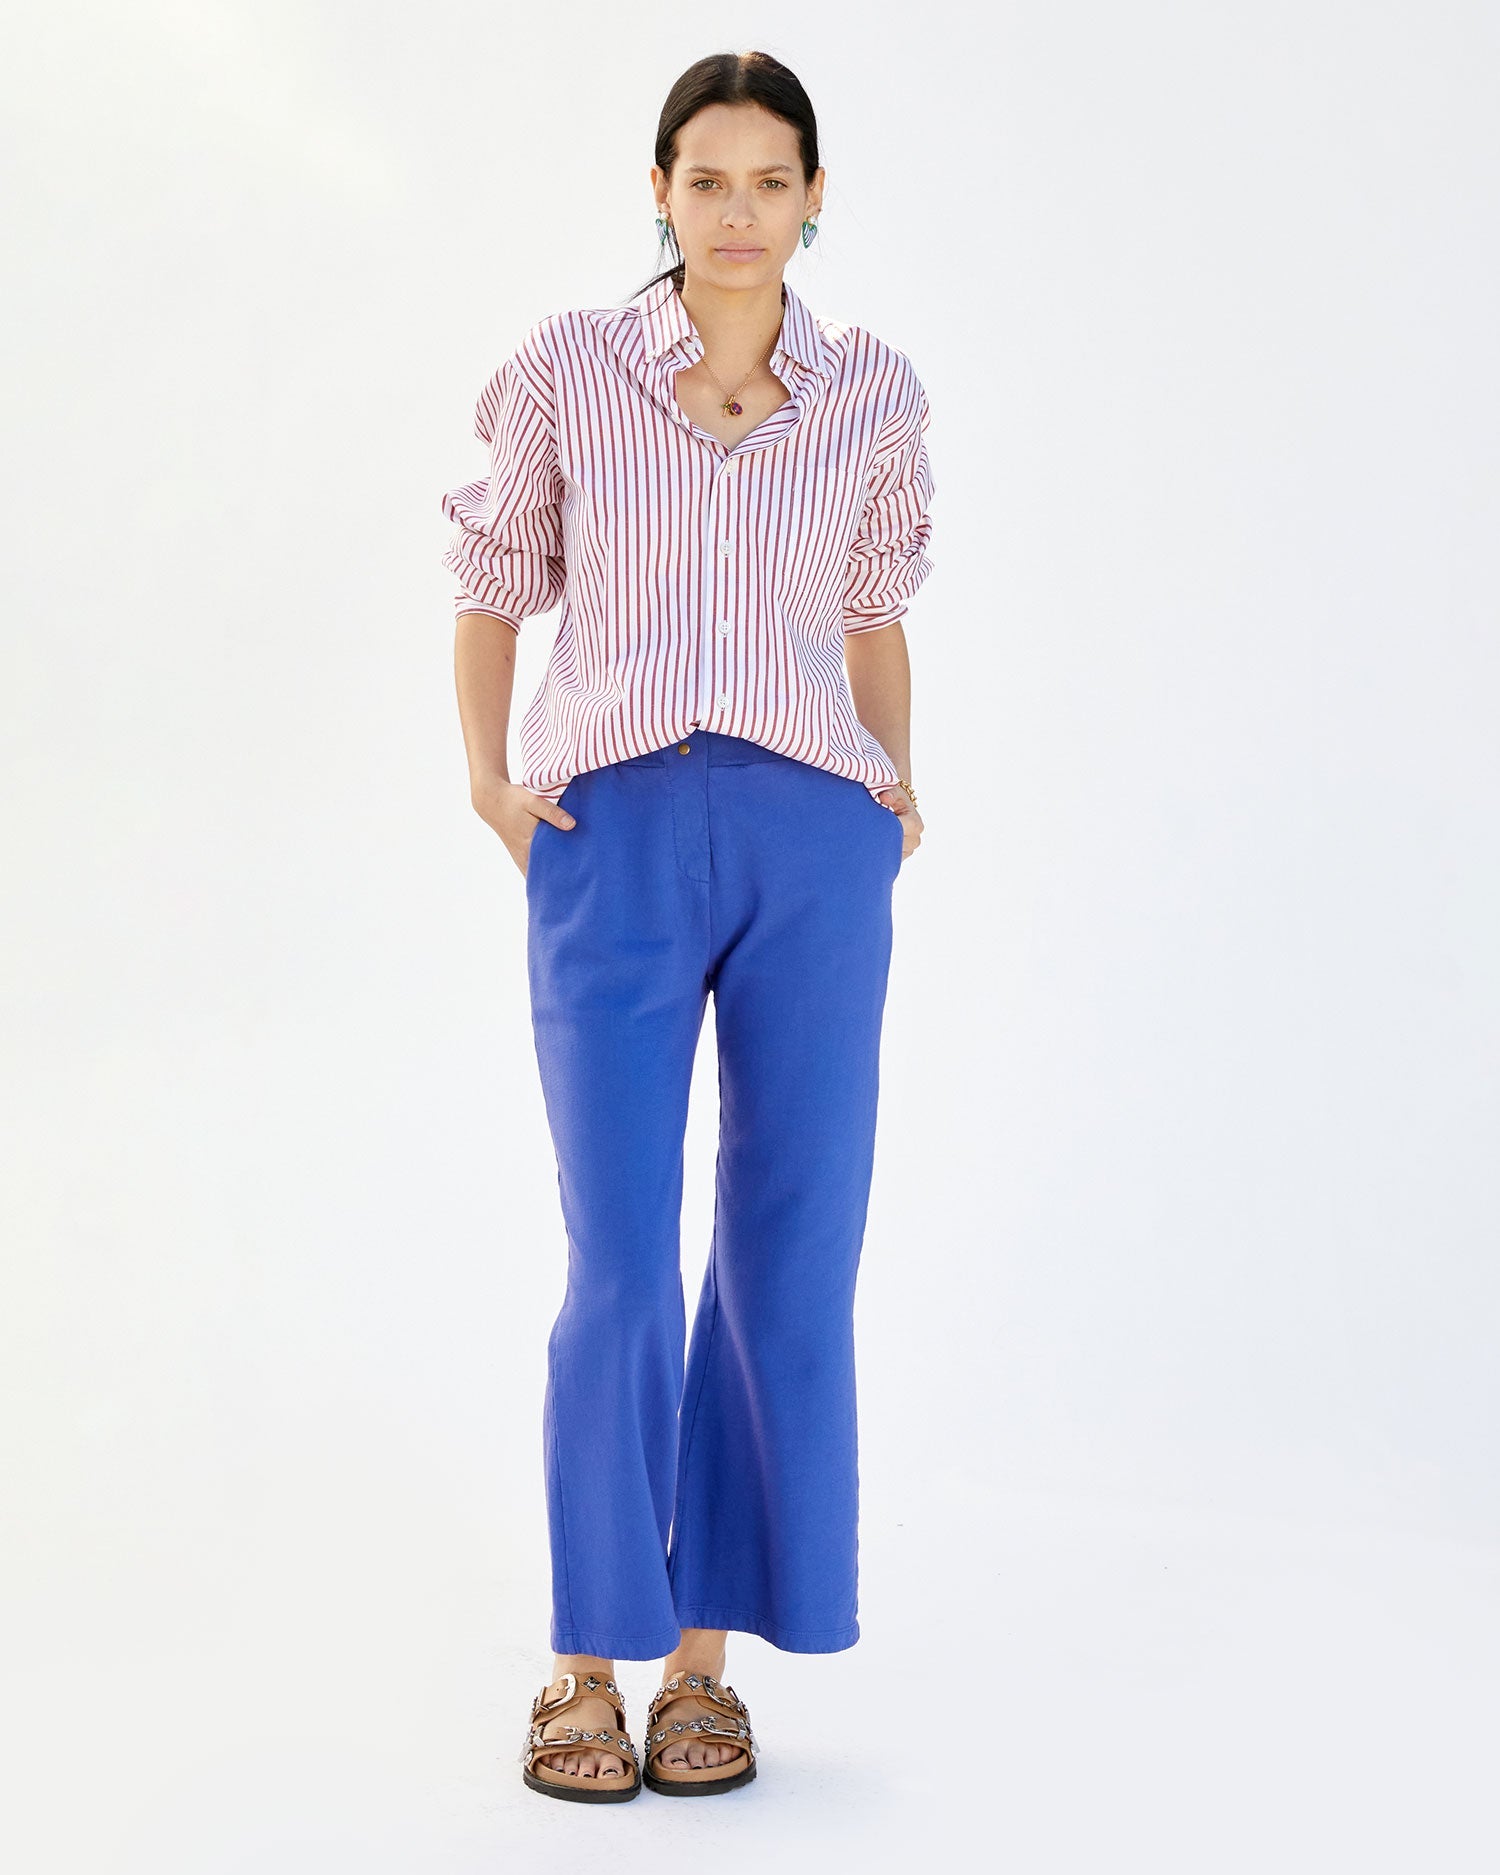 aurelia wearing the Cobalt Le Snap Pants with a button up shirt. her hands are in the pant's pockets and she's wearing sandals